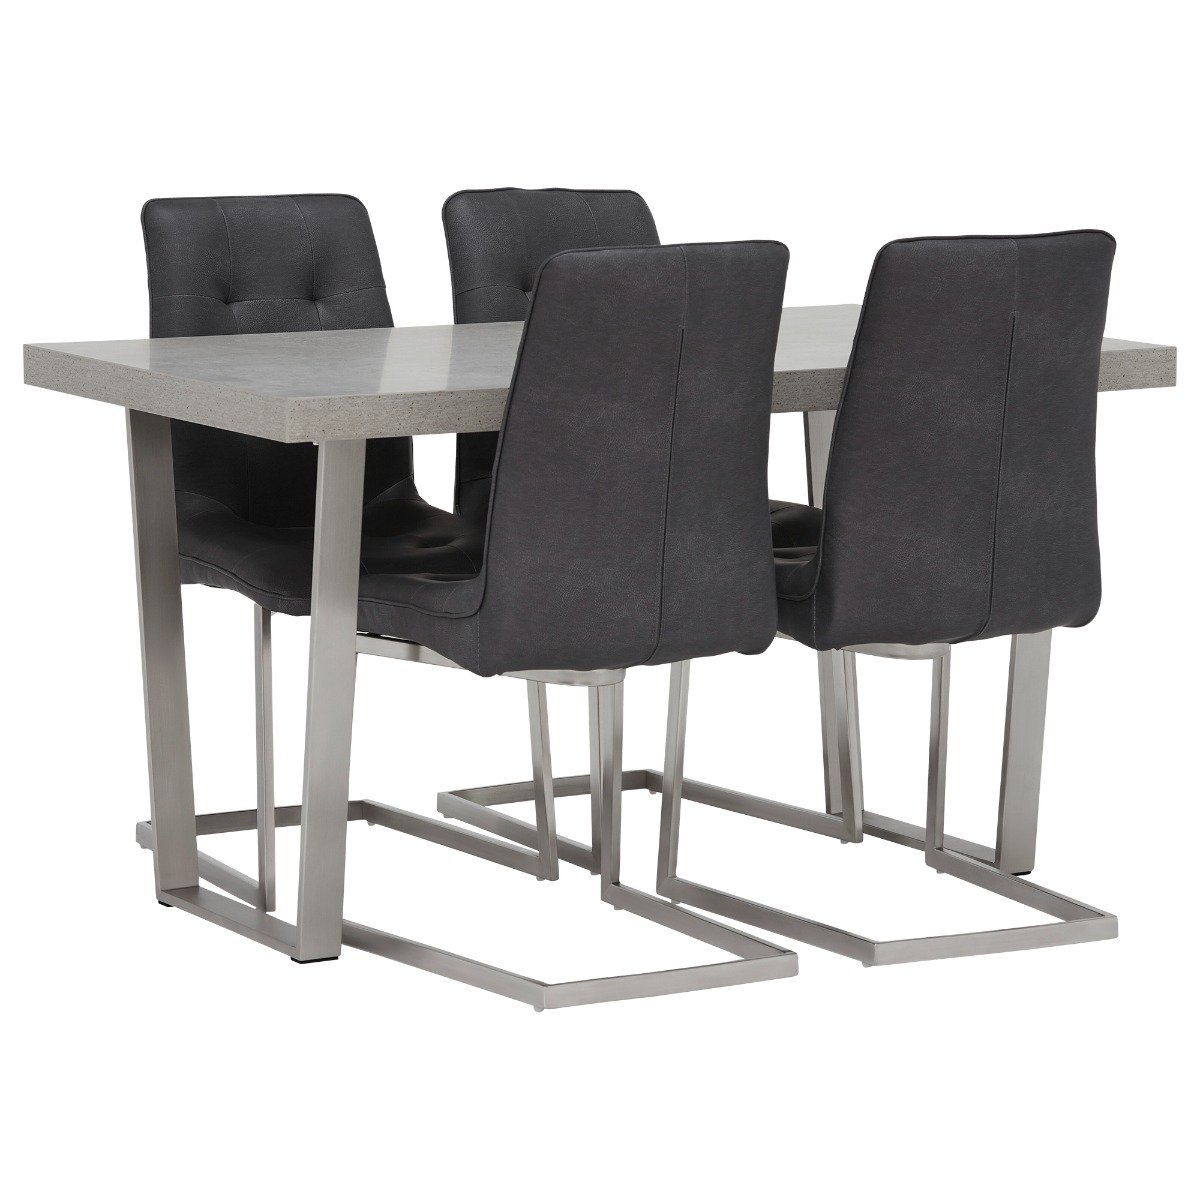 Photo of Halmstad 135cm dining table & 4 ericka chairs in grey